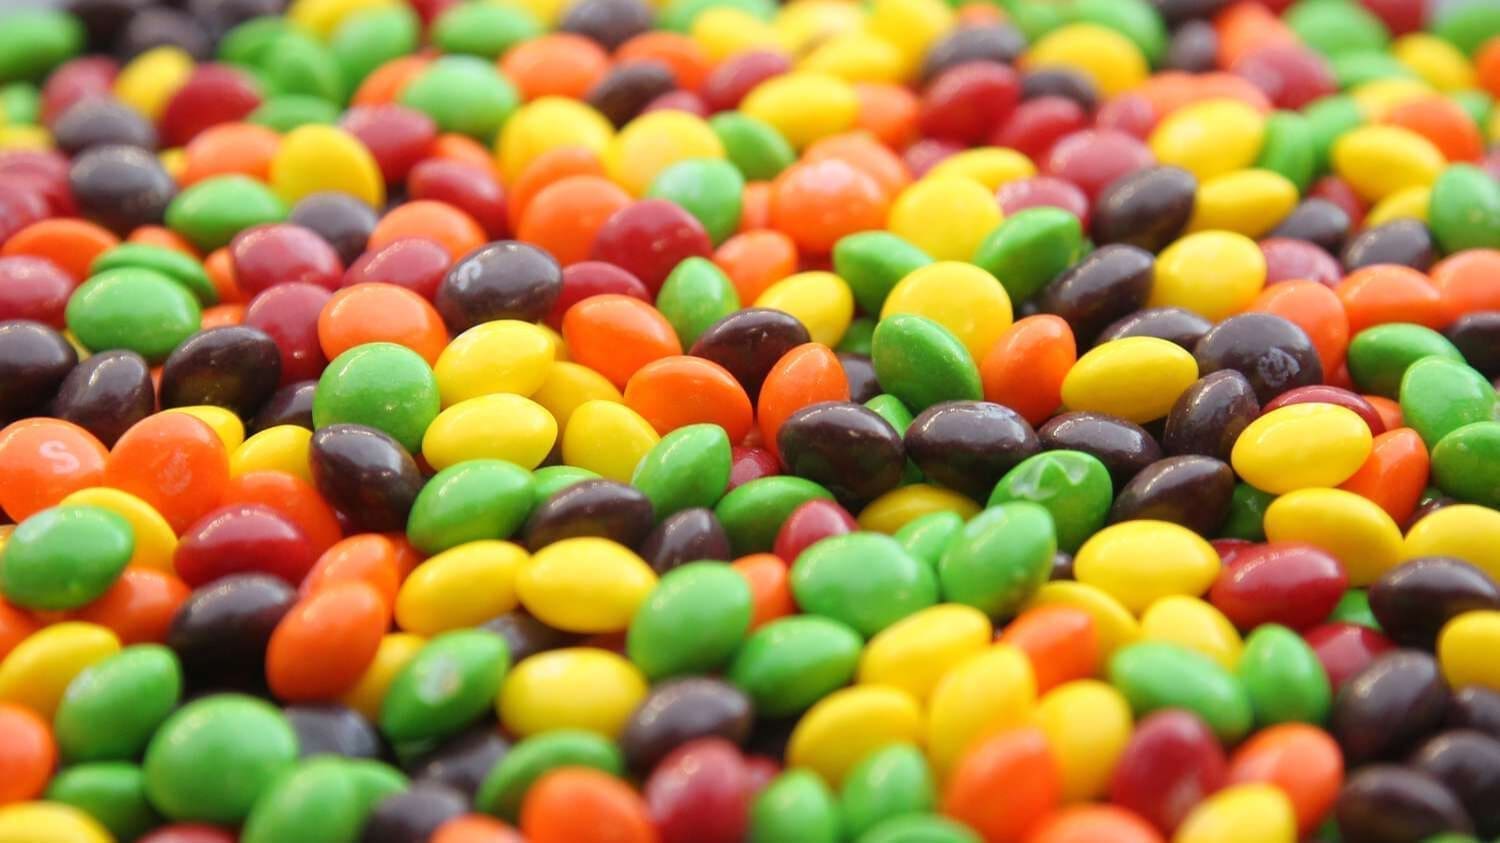 California becomes first US state to ban “harmful” food additives in landmark legislation